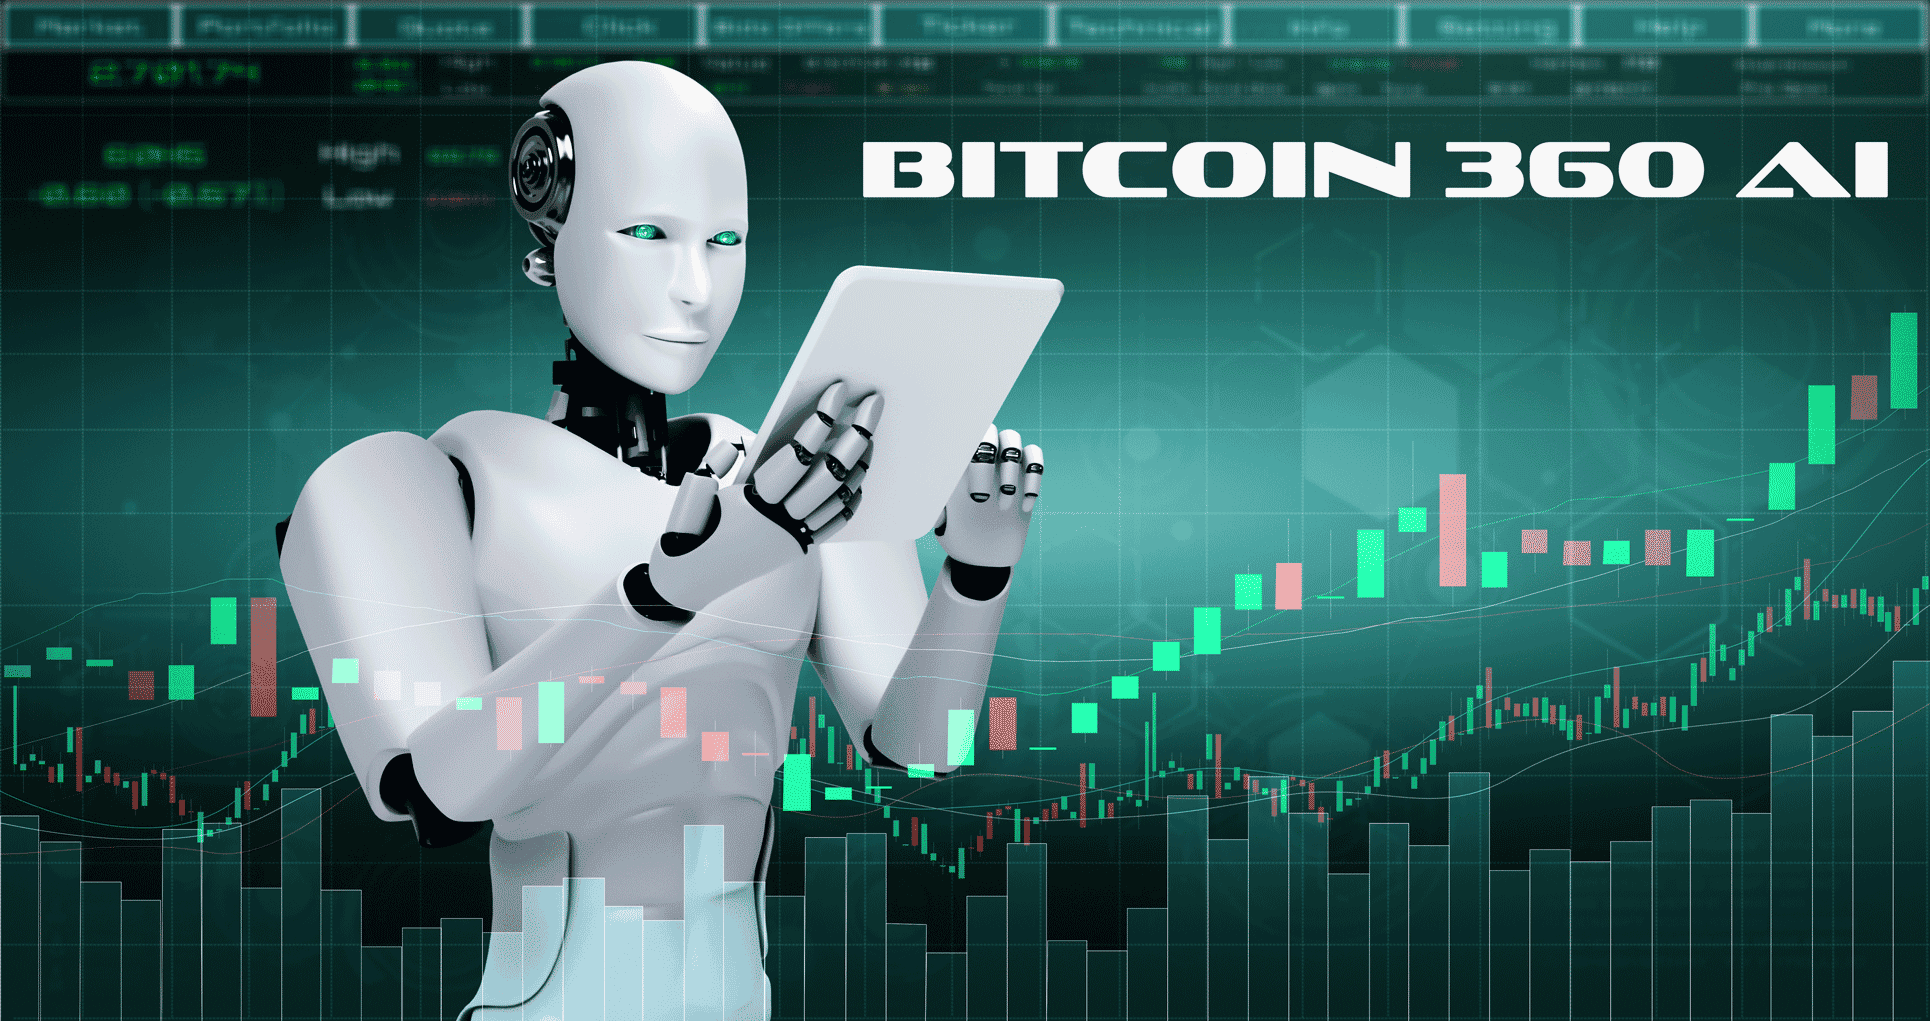 Bitcoin 360 AI: Unleashing the Potential of the Ultimate Bitcoin Trading Platform